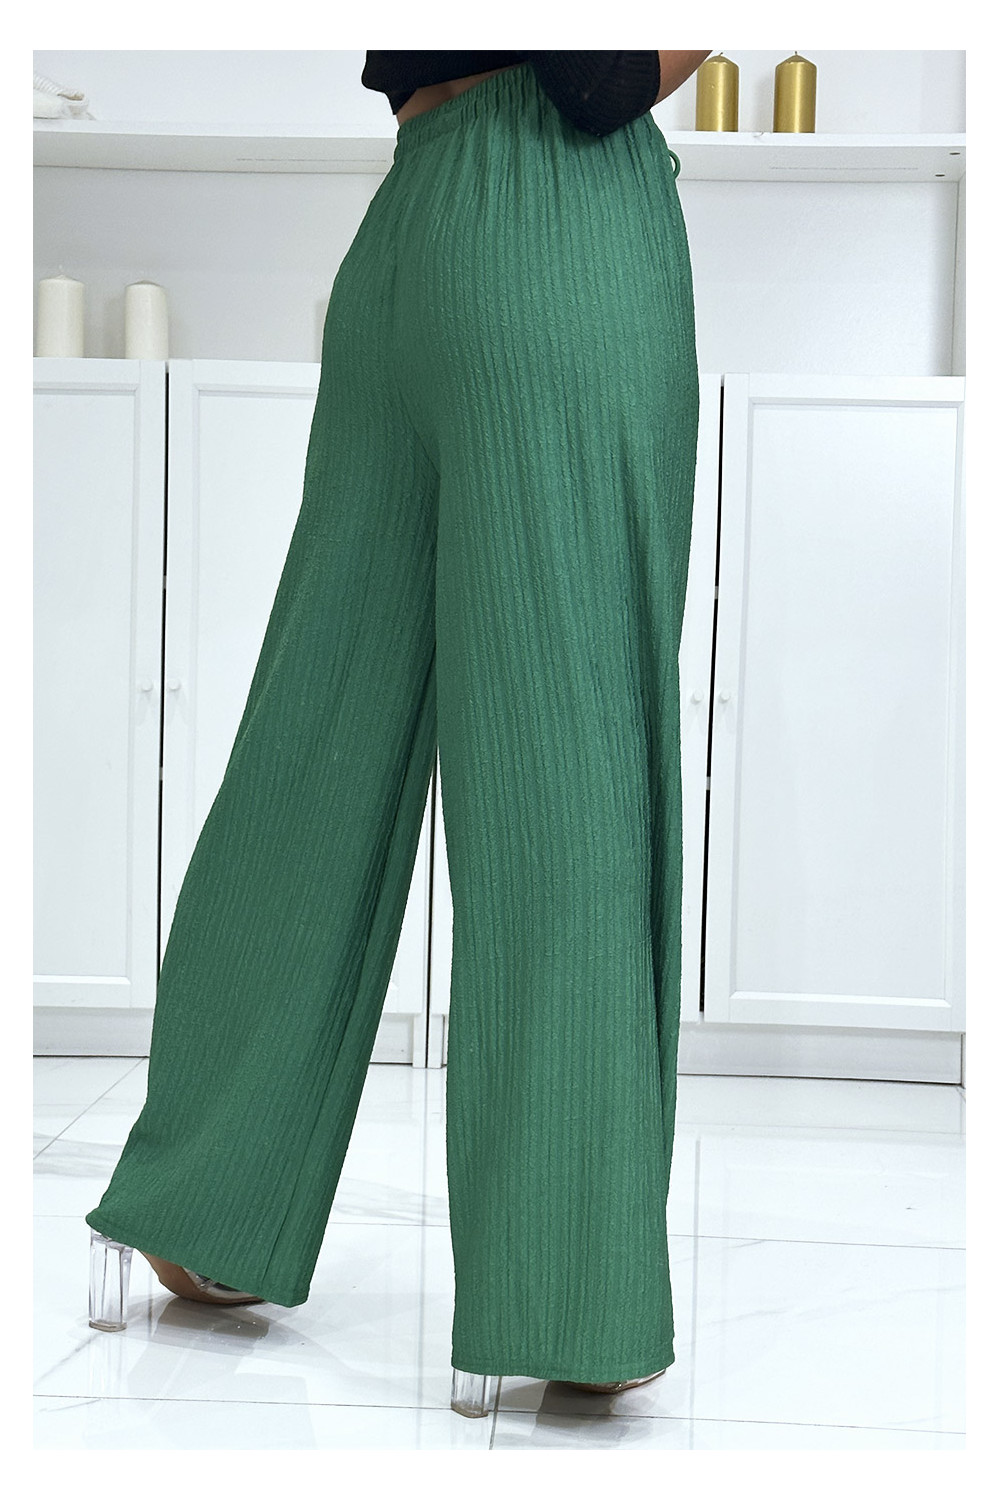 Trendy and chic green palazzo pants